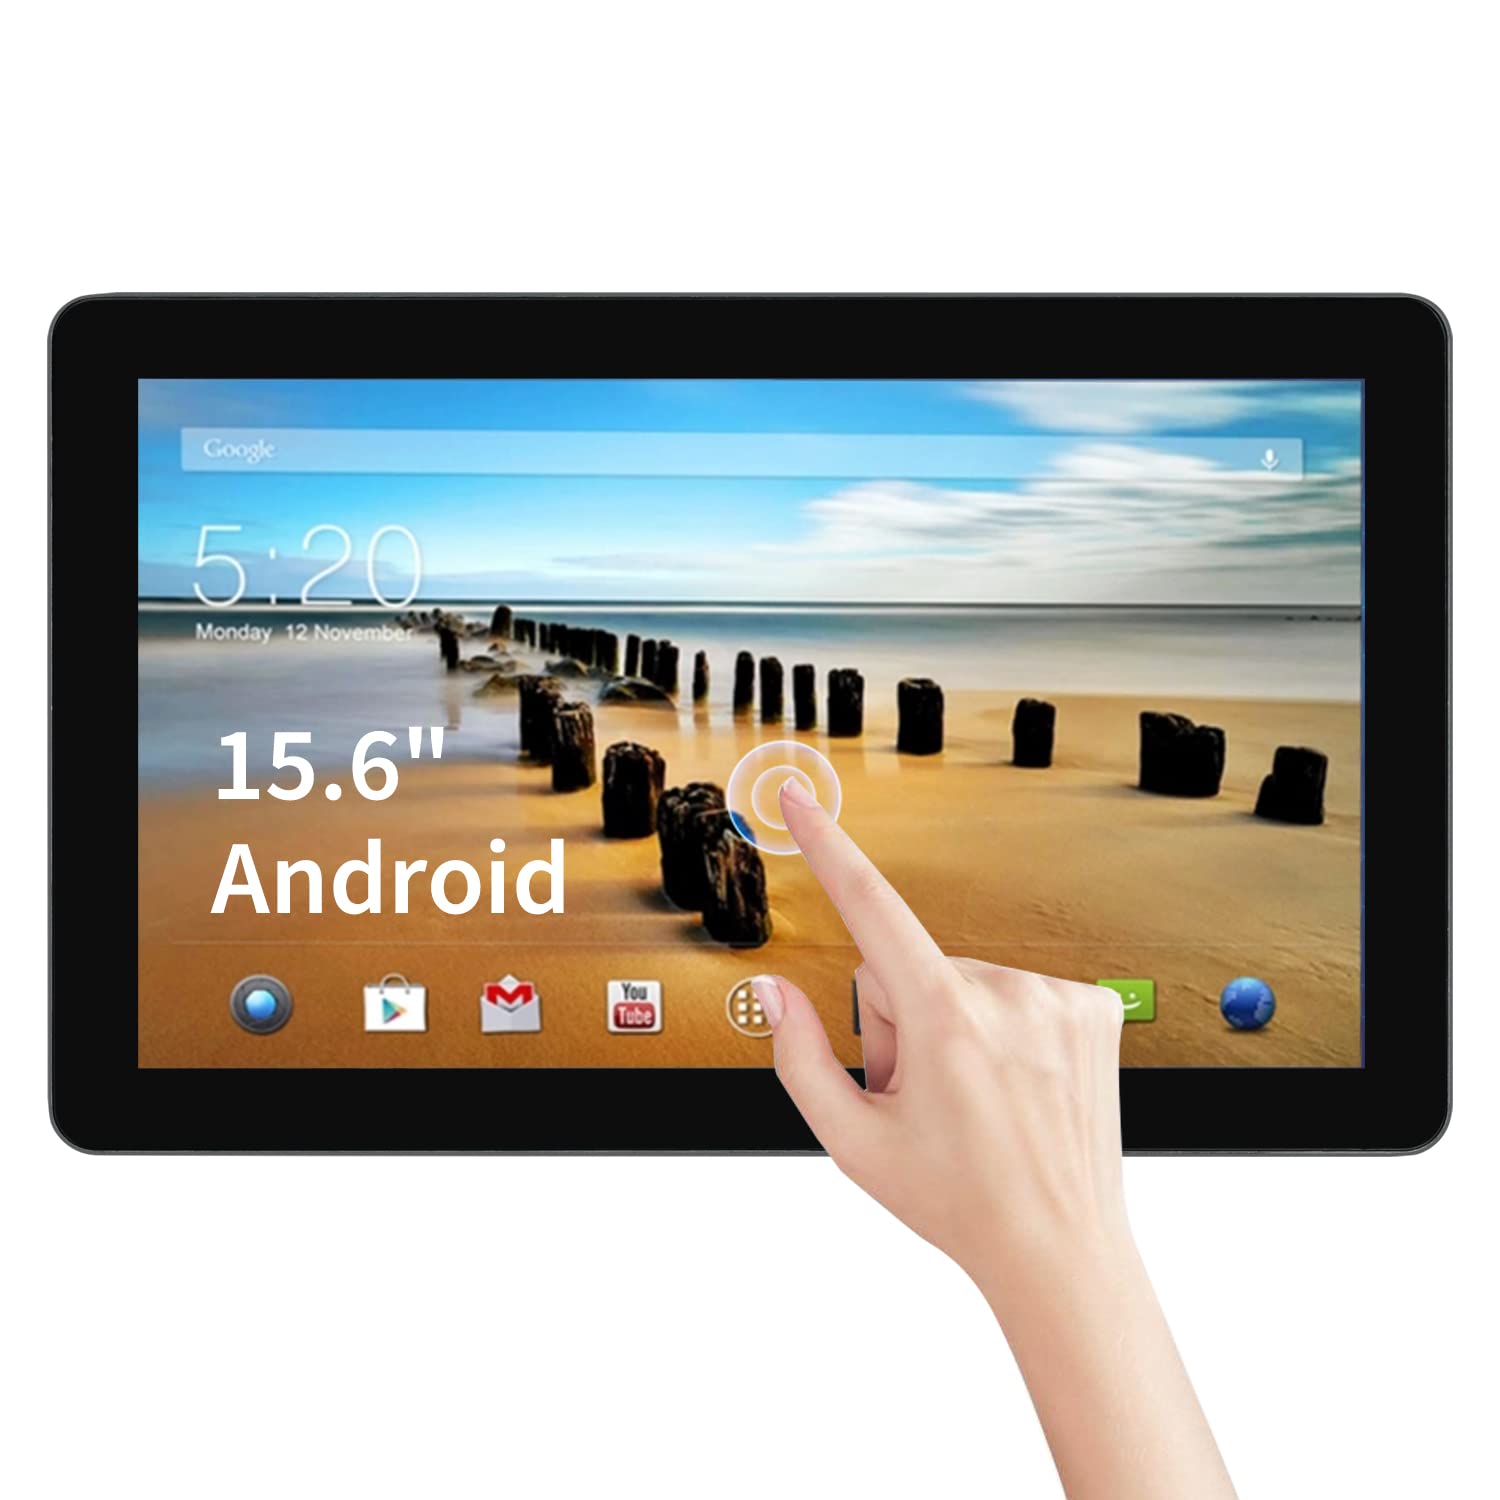 TouchWo 15.6 inch Touchscreen Monitor Android All-in-One PC Include WiFi Built-in Speakers Capture a Signature HDMI Input